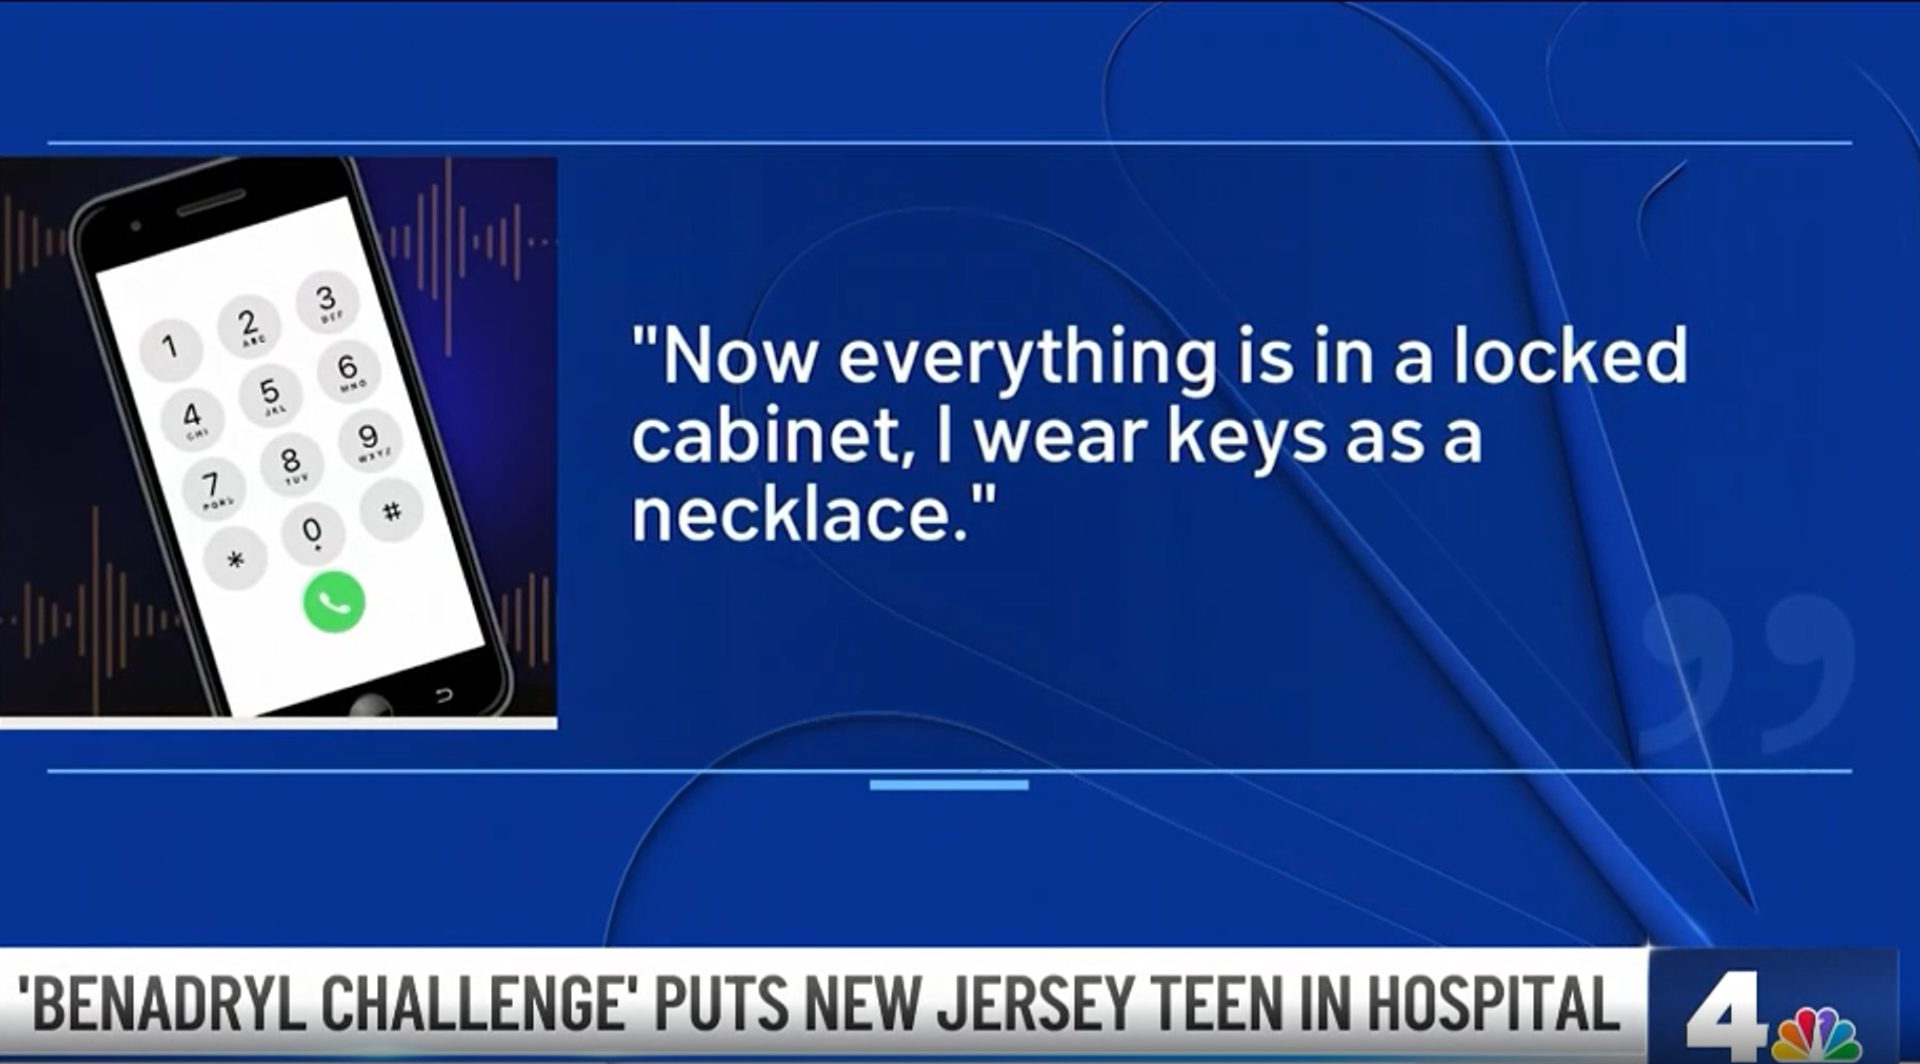 It landed a 13-year-old boy in New Jersey in the hospital